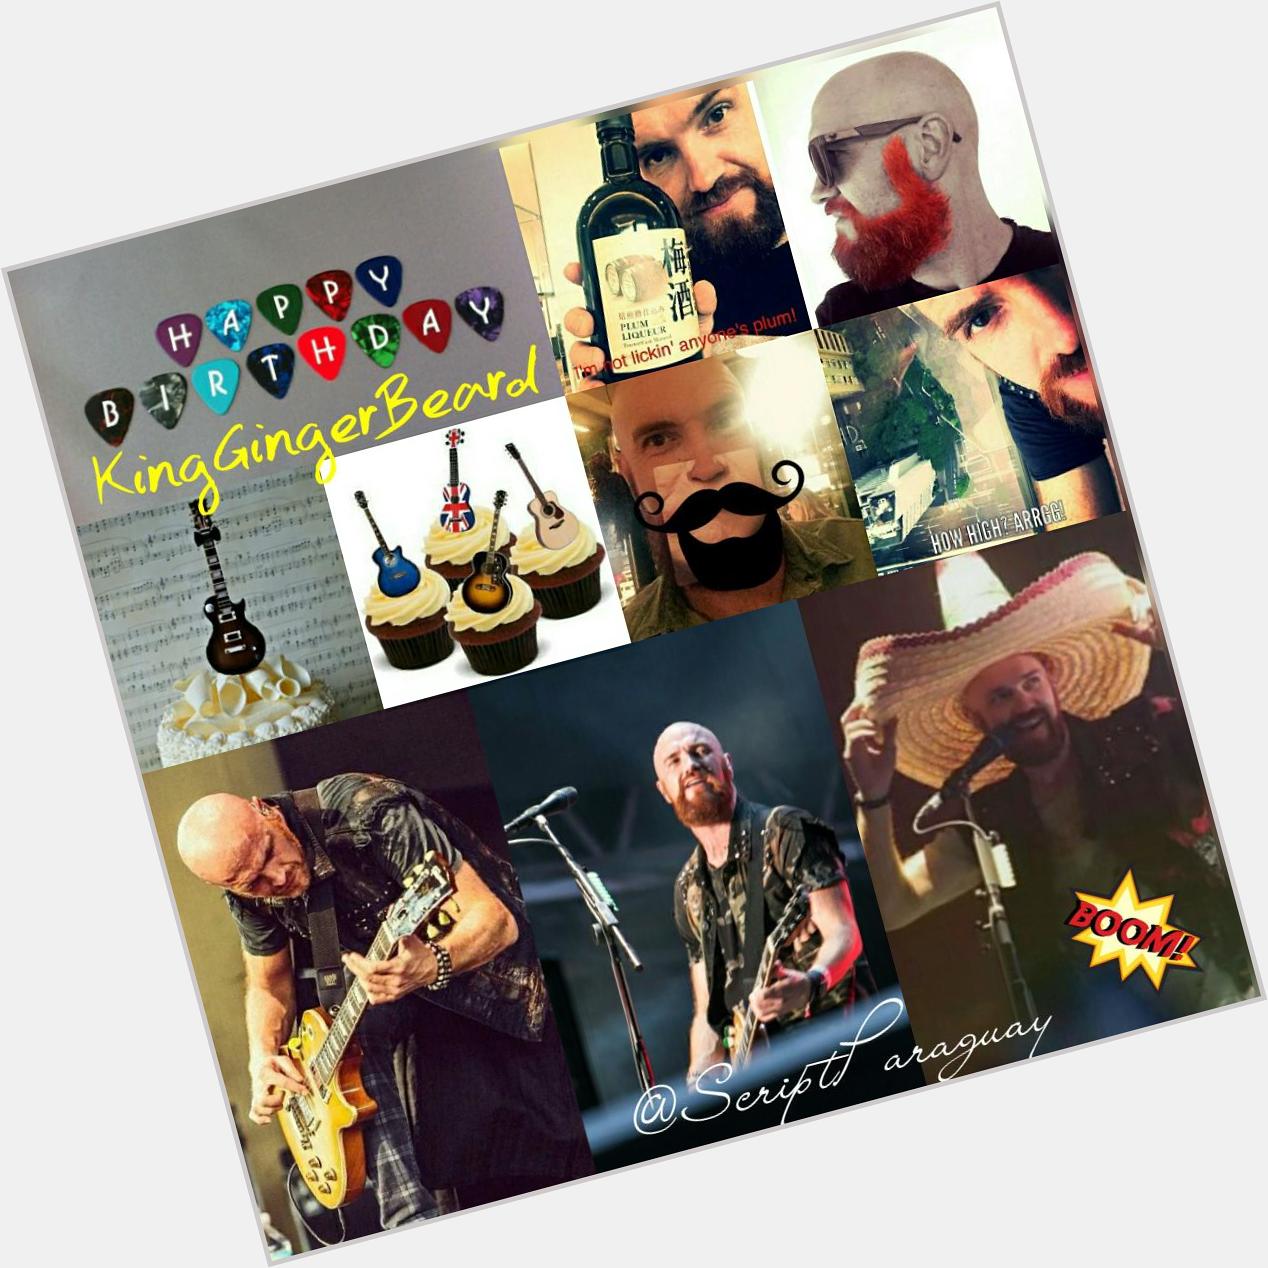  Happy birthday to our favourite guitarist, Mark Sheehan!         